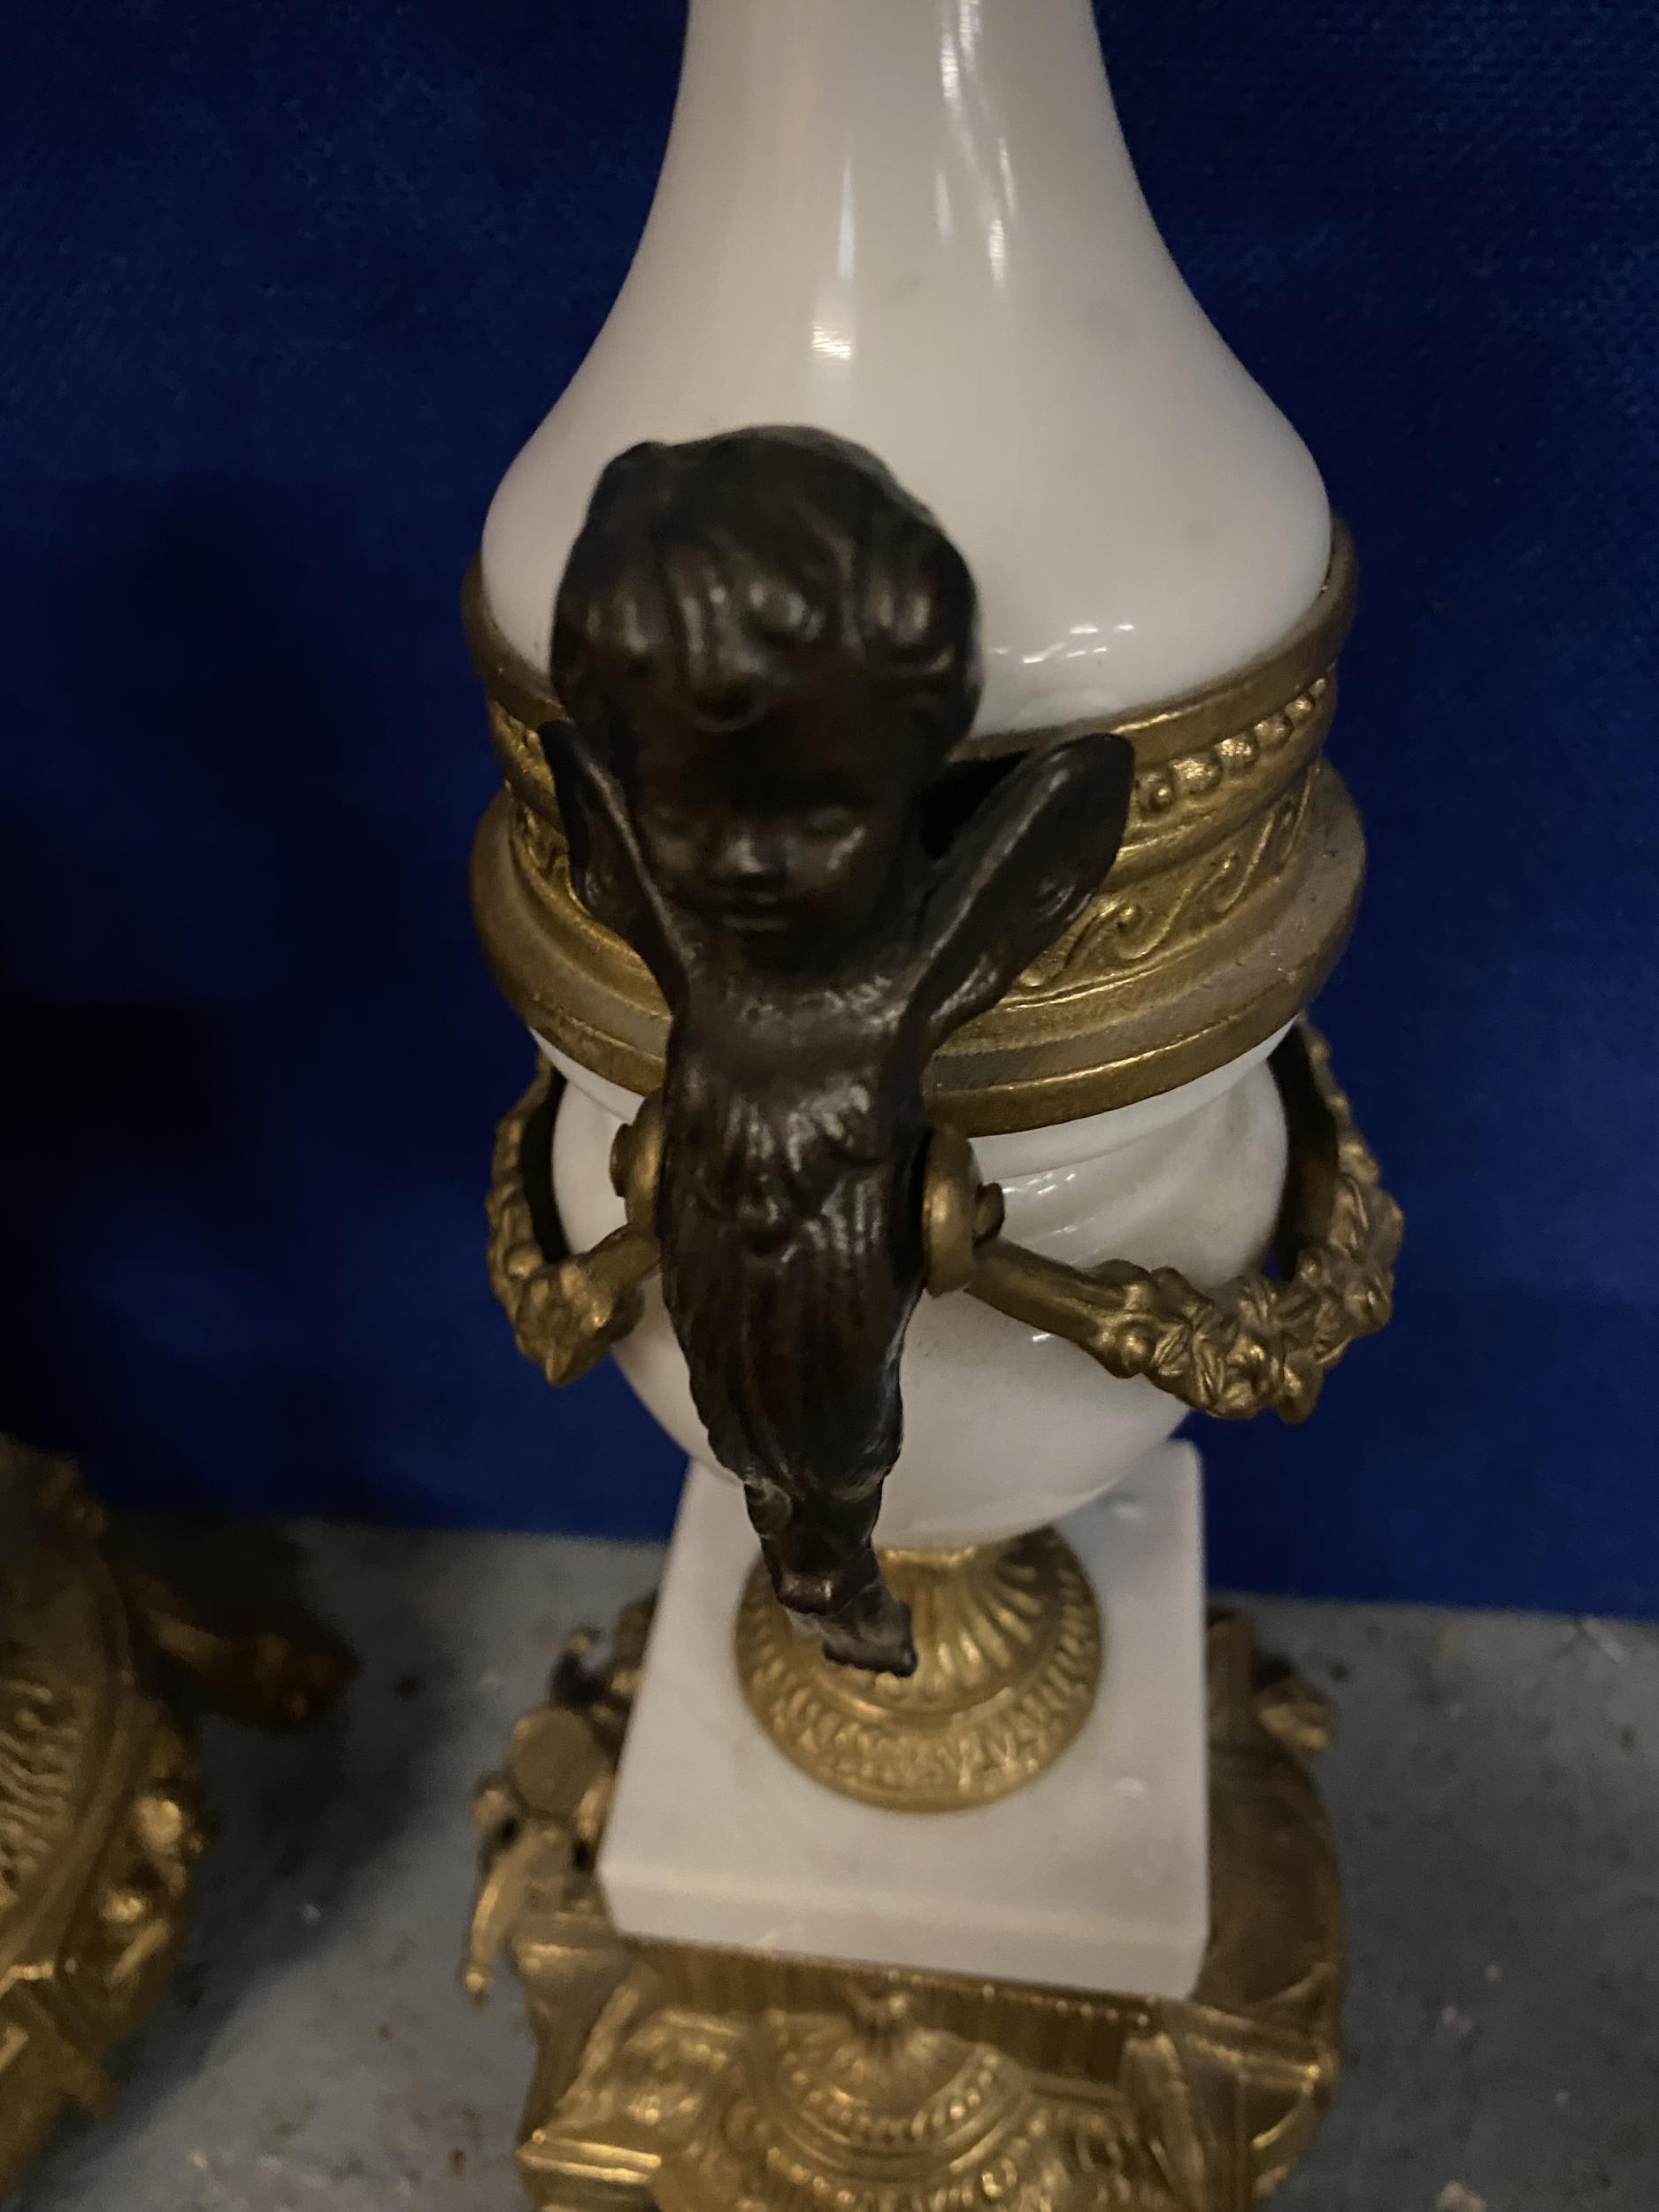 AN ORNATE IMPERIAL FRENCH GILT MANTLE CLOCK ON A MARBLE AND GILT BASE WITH CHERUB FAWN DECORATION - Image 6 of 10